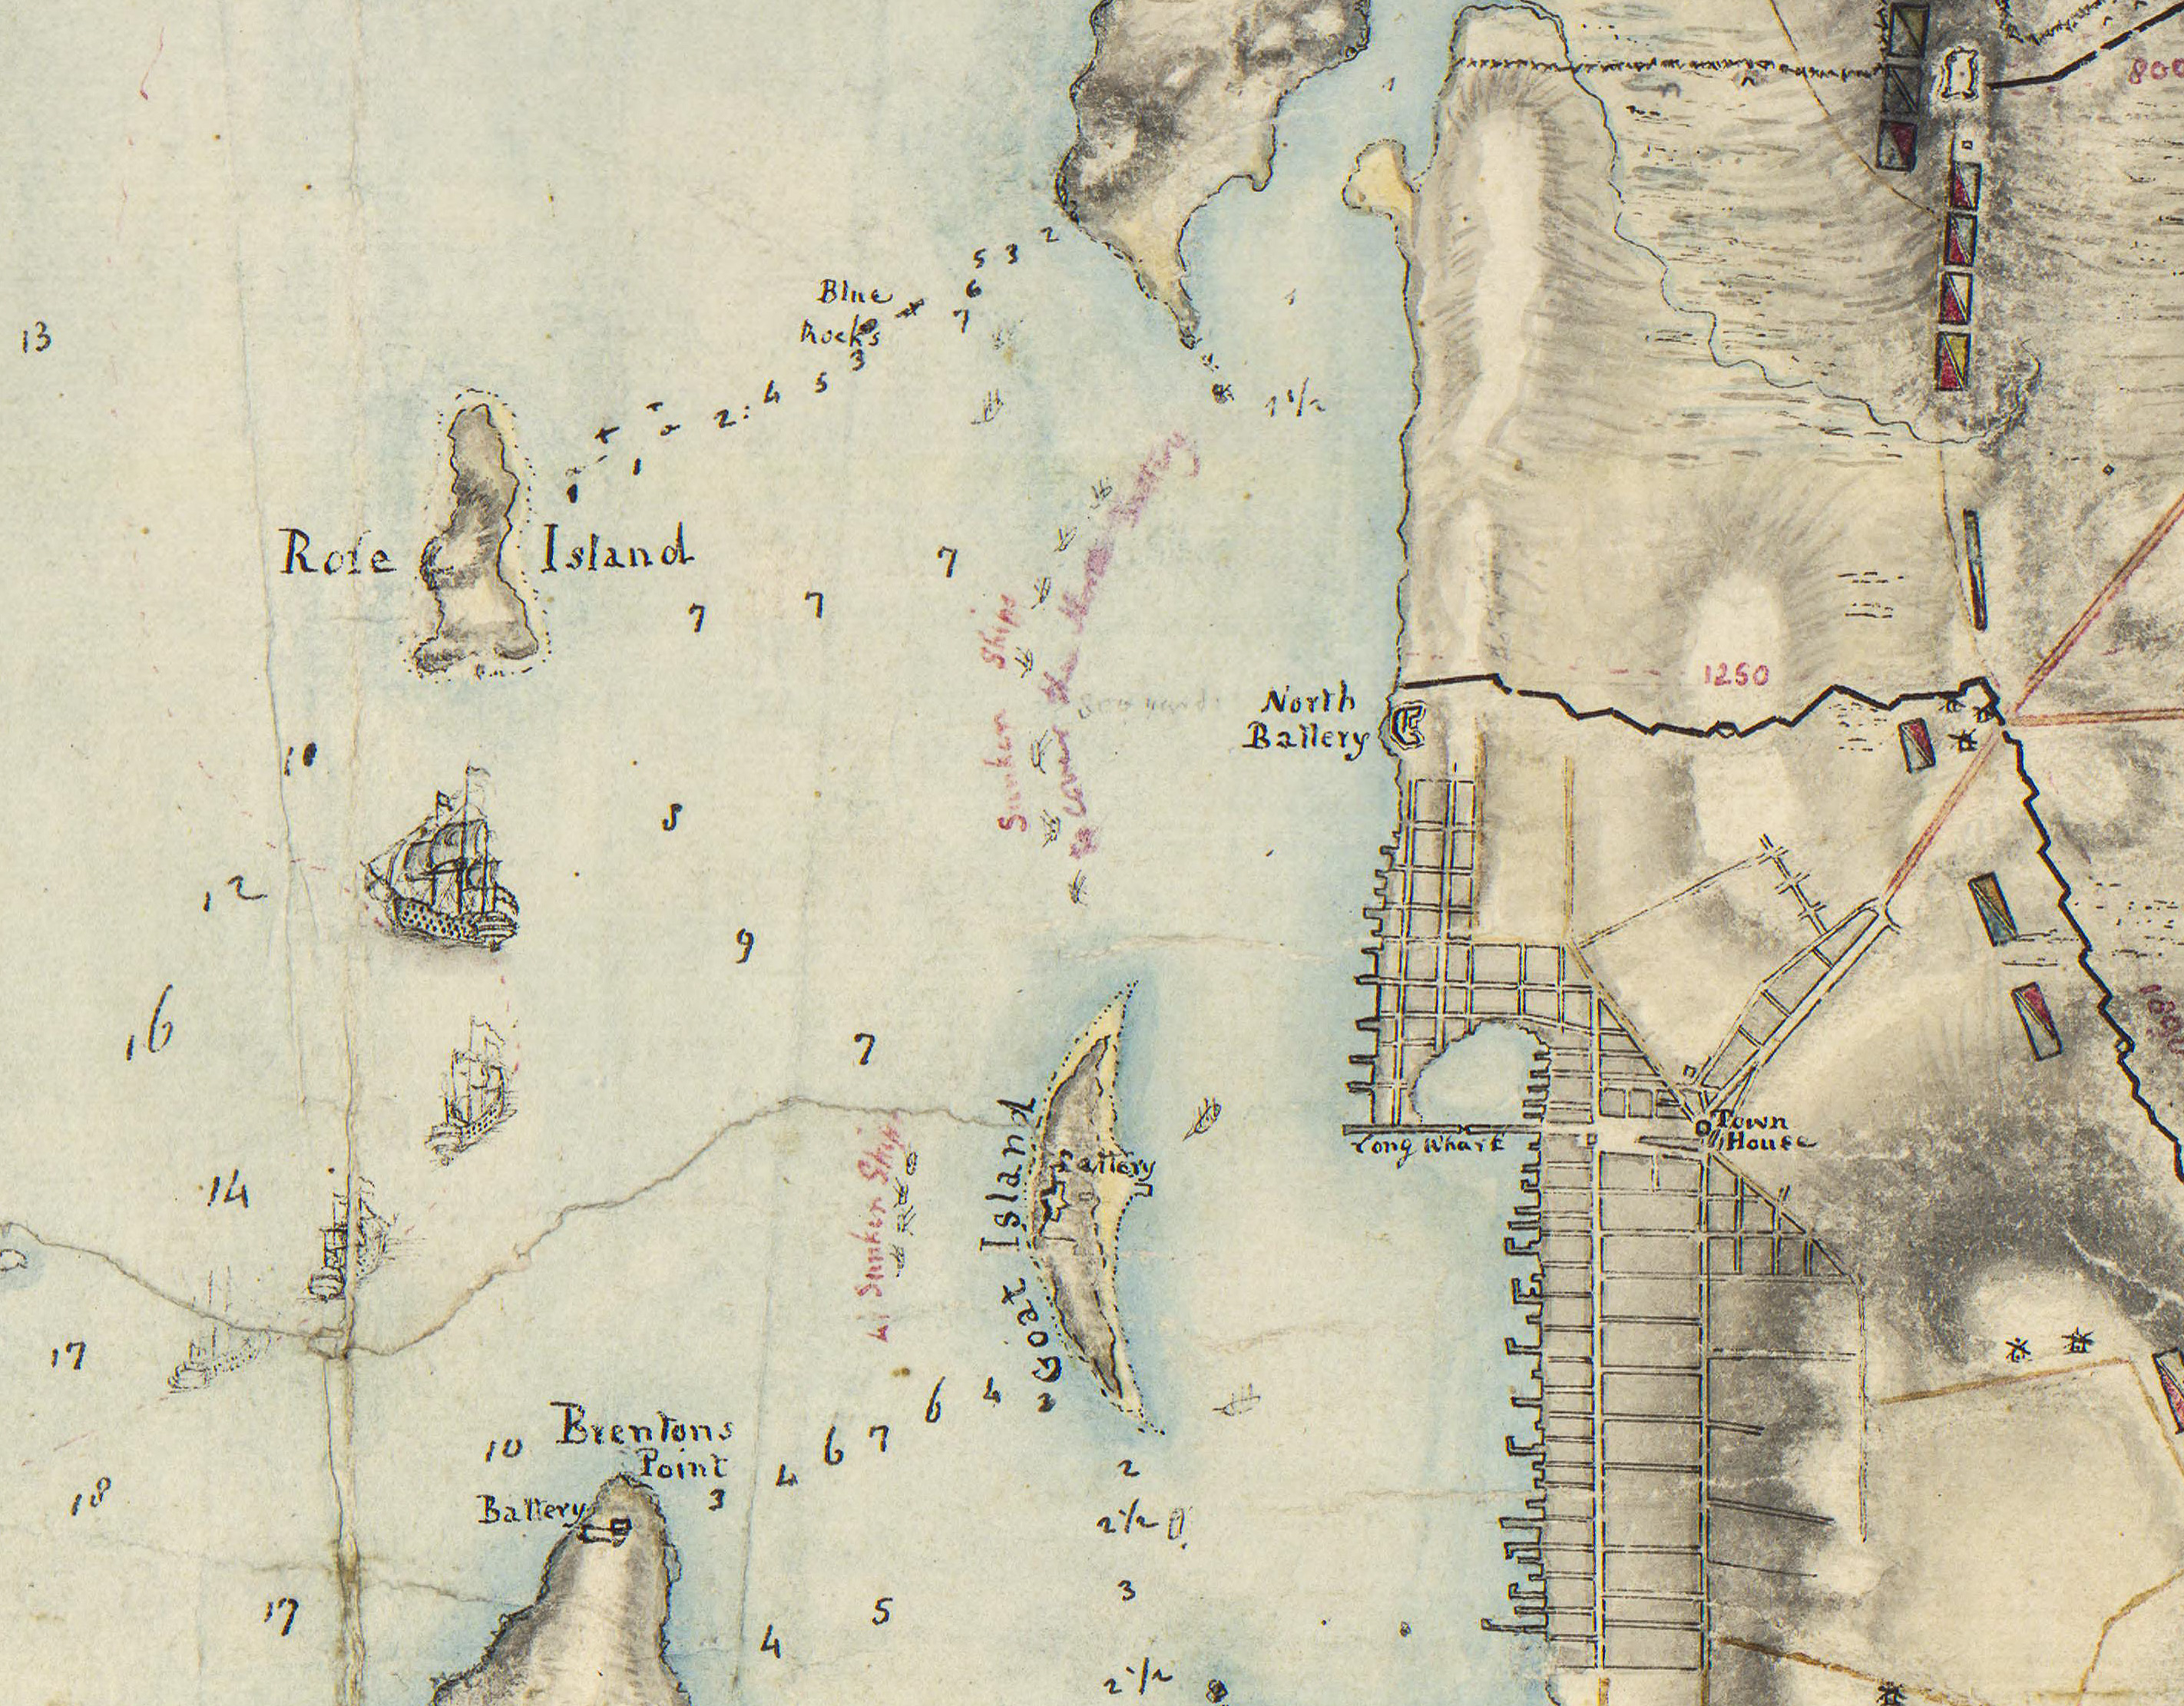 A vintage map of Newport Harbor showing the location of British sunken ships near Goat Island, Newport